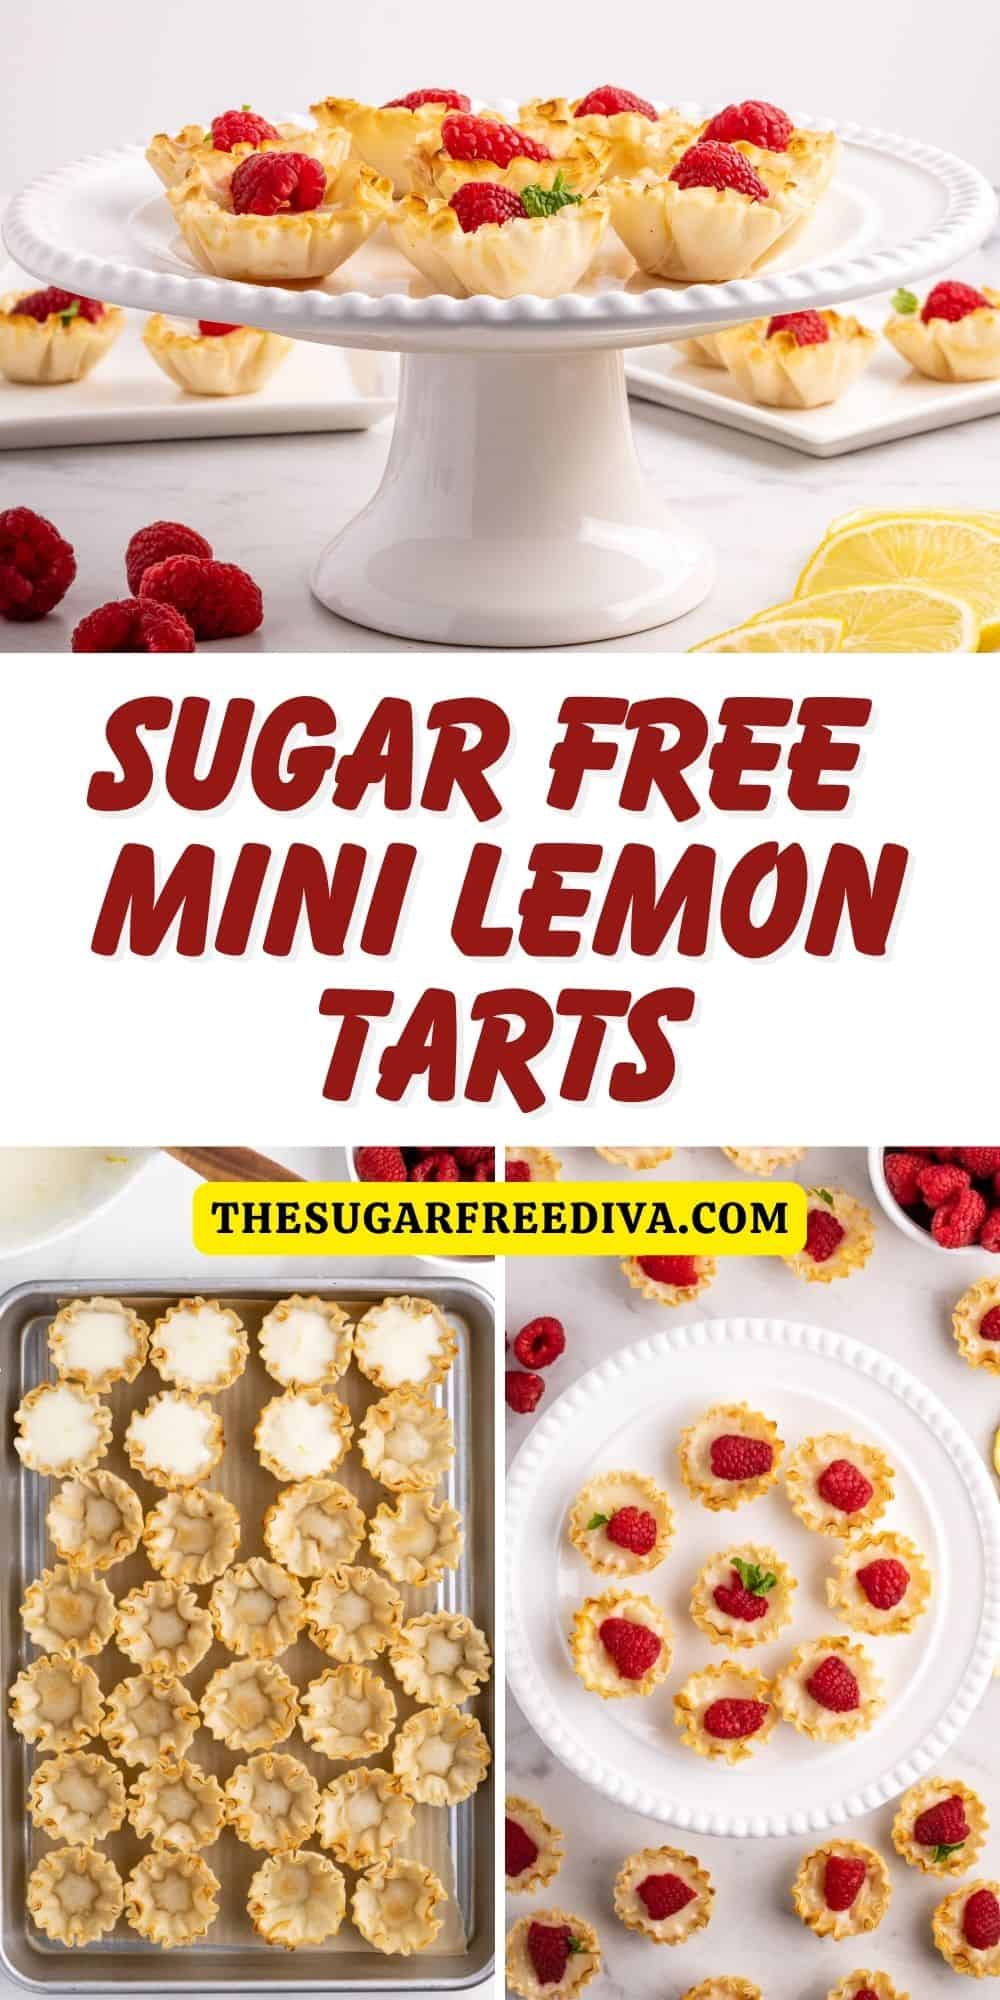 Sugar Free Mini Lemon Tarts, a simple  dessert recipe featuring a creamy lemon filling in a flaky crisp phyllo cup. Made with no added sugar.